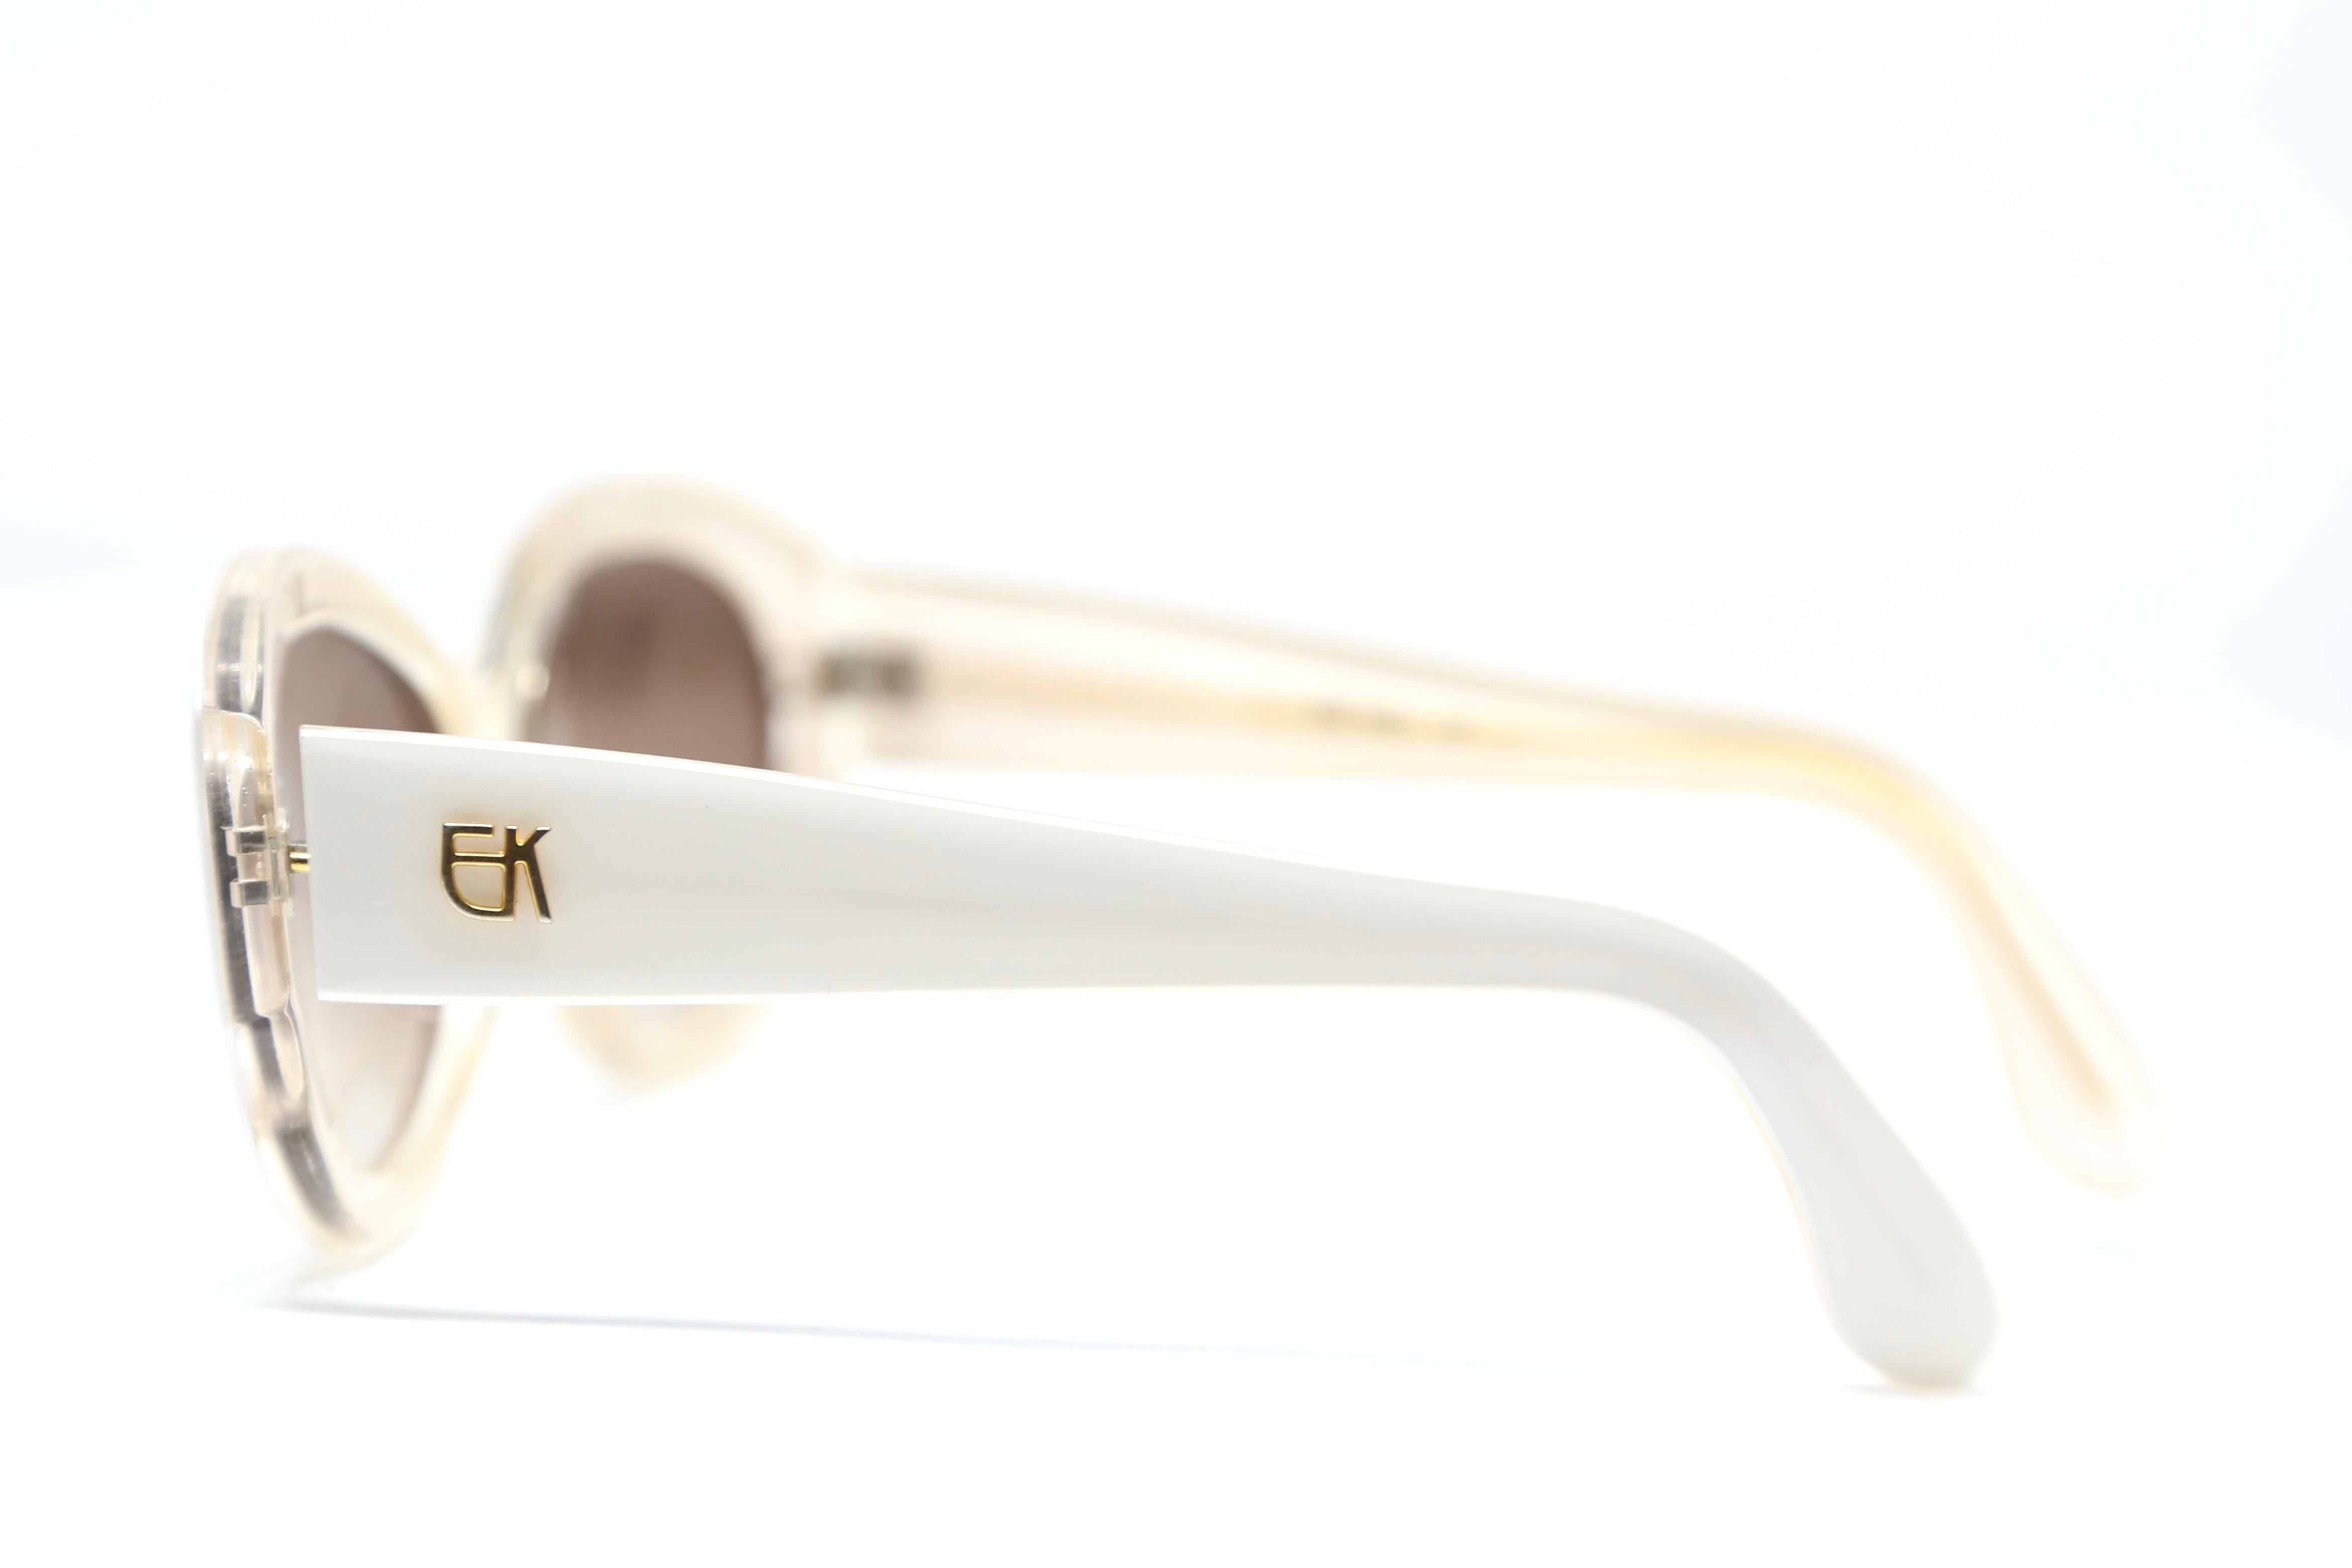 Opaque white plastic sunglasses fused with clear backing and gold-toned metal EK logos at temples designed by Emmanuelle Khanh dating to the late 1980's, early 1990's. Frames work well for a narrow head (fit snugly). Approximate measurements: 5.5